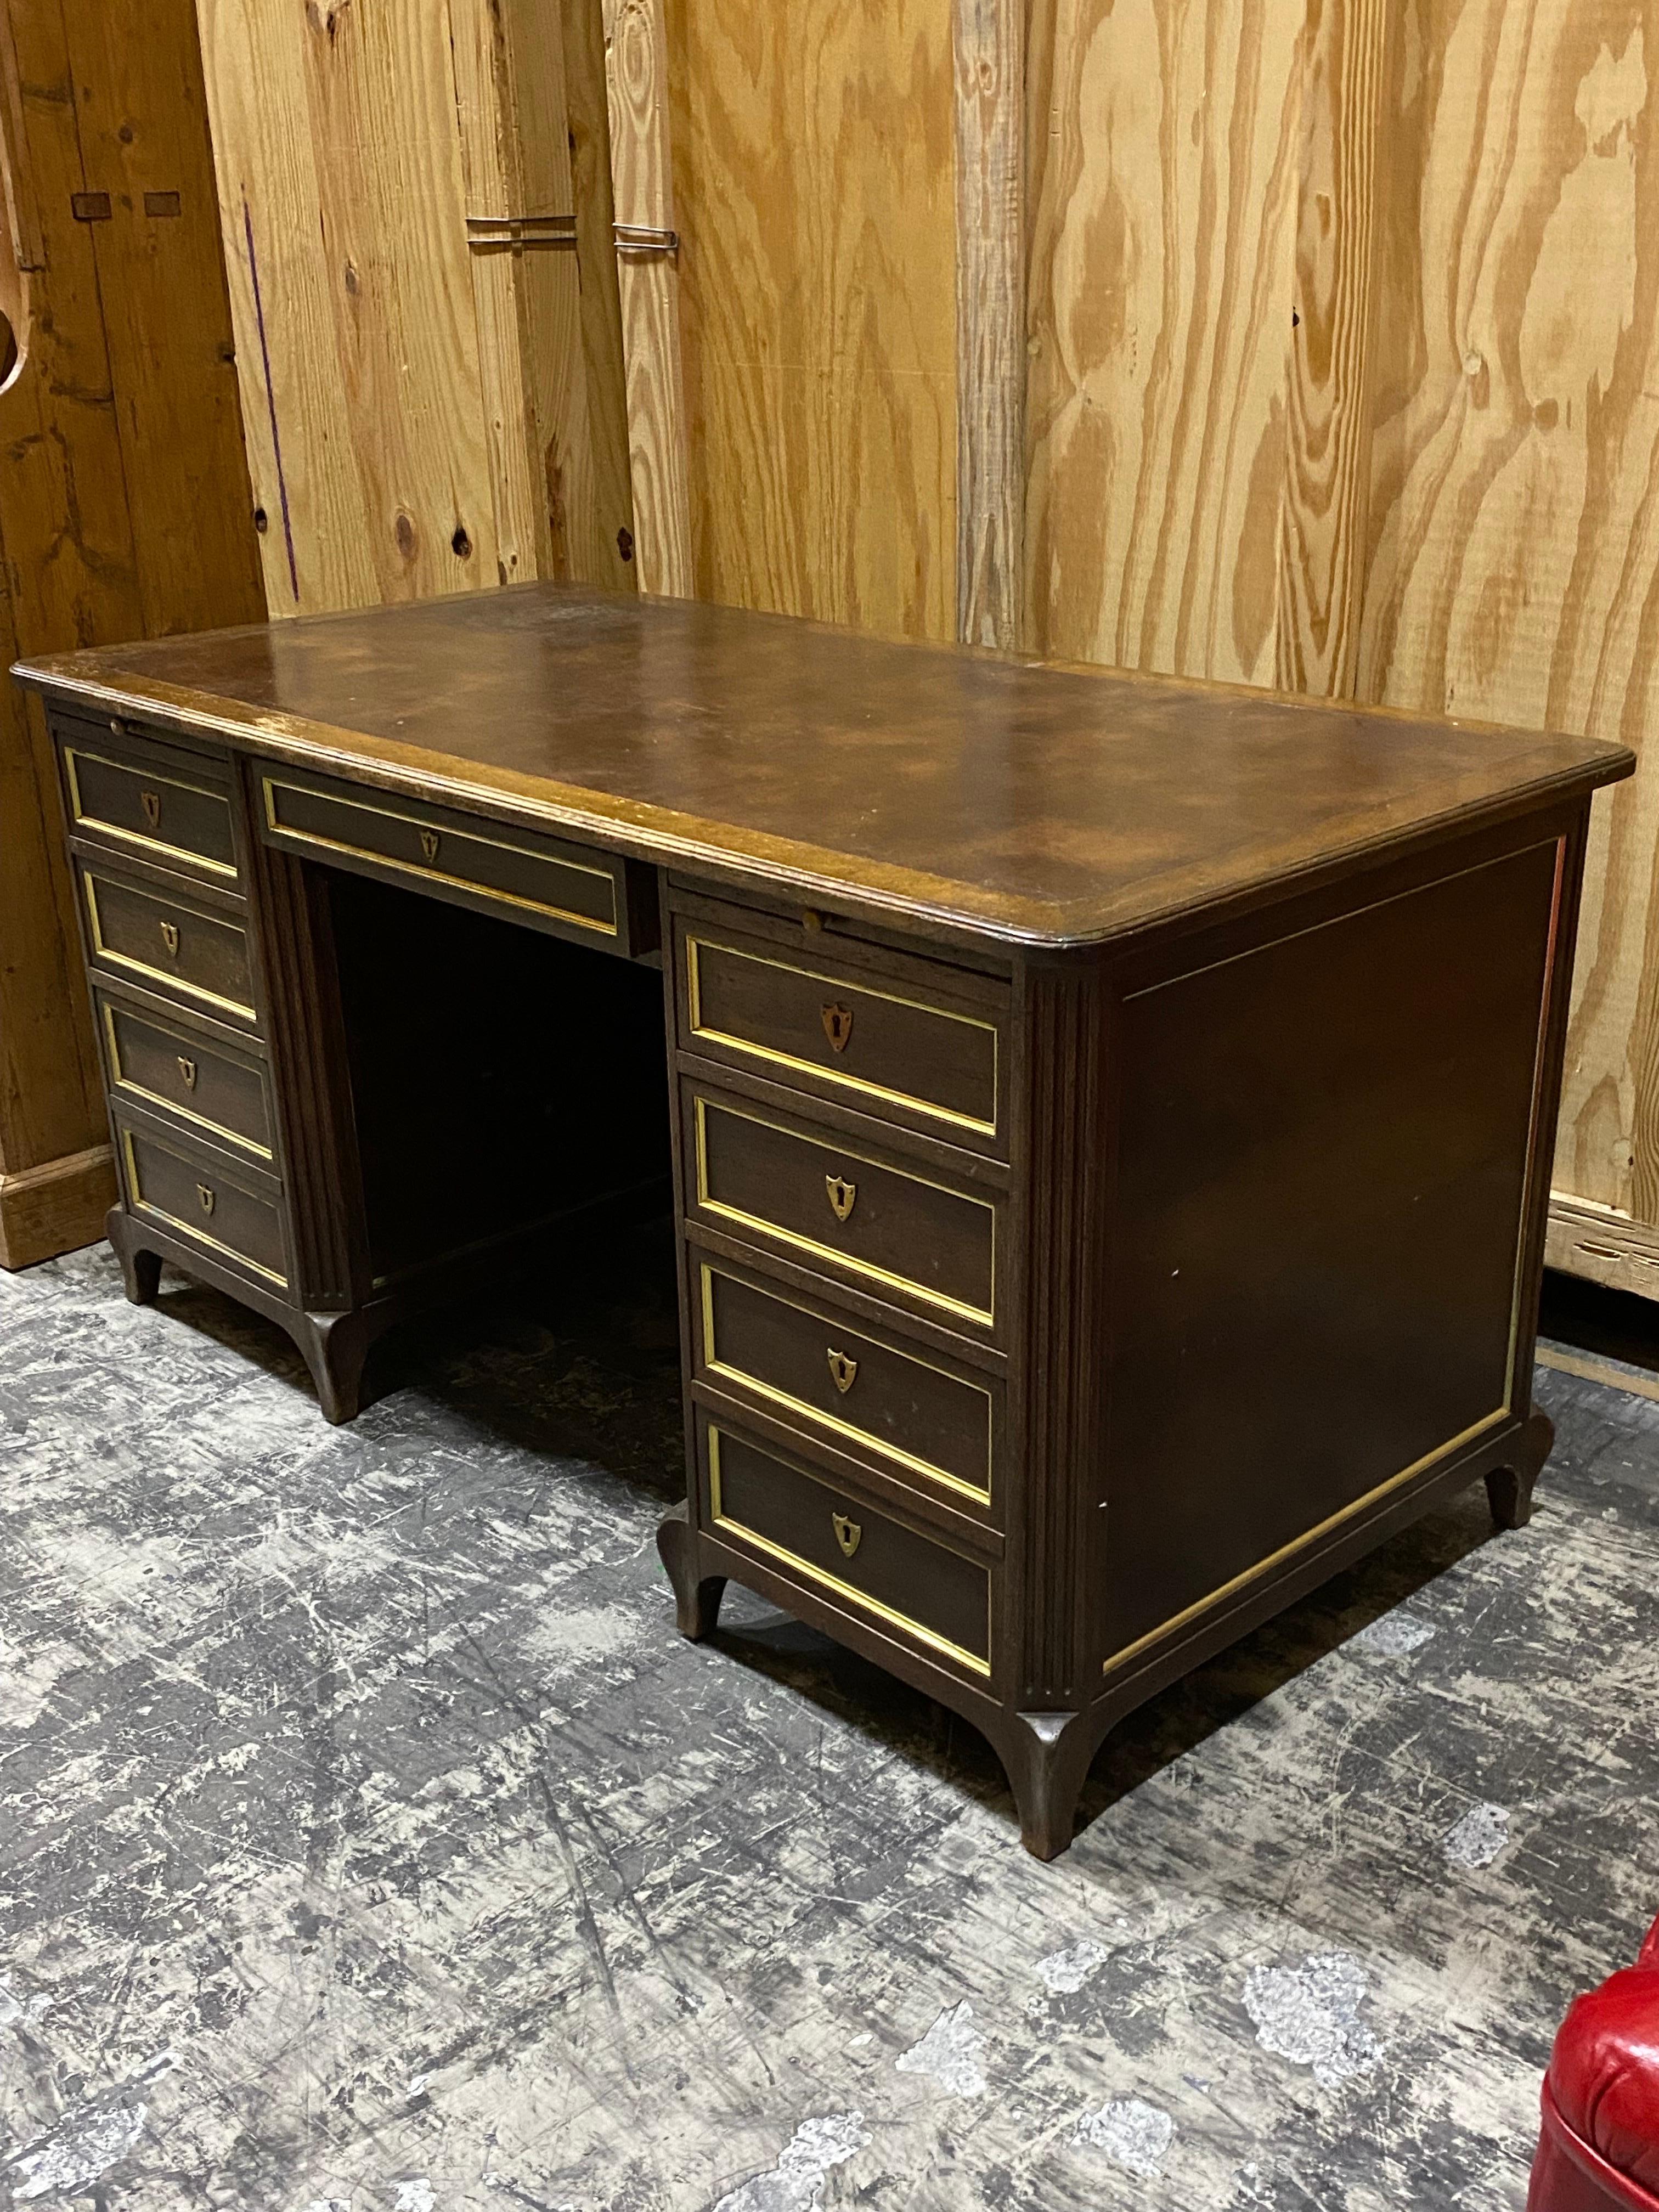 20th century French Directoire Style mahogany and brass writing desk from W. & J. Sloane
A classic design and well proportioned desk with plenty of drawers for organization. Eight Drawers, four on either side of central knee hole, and a wider